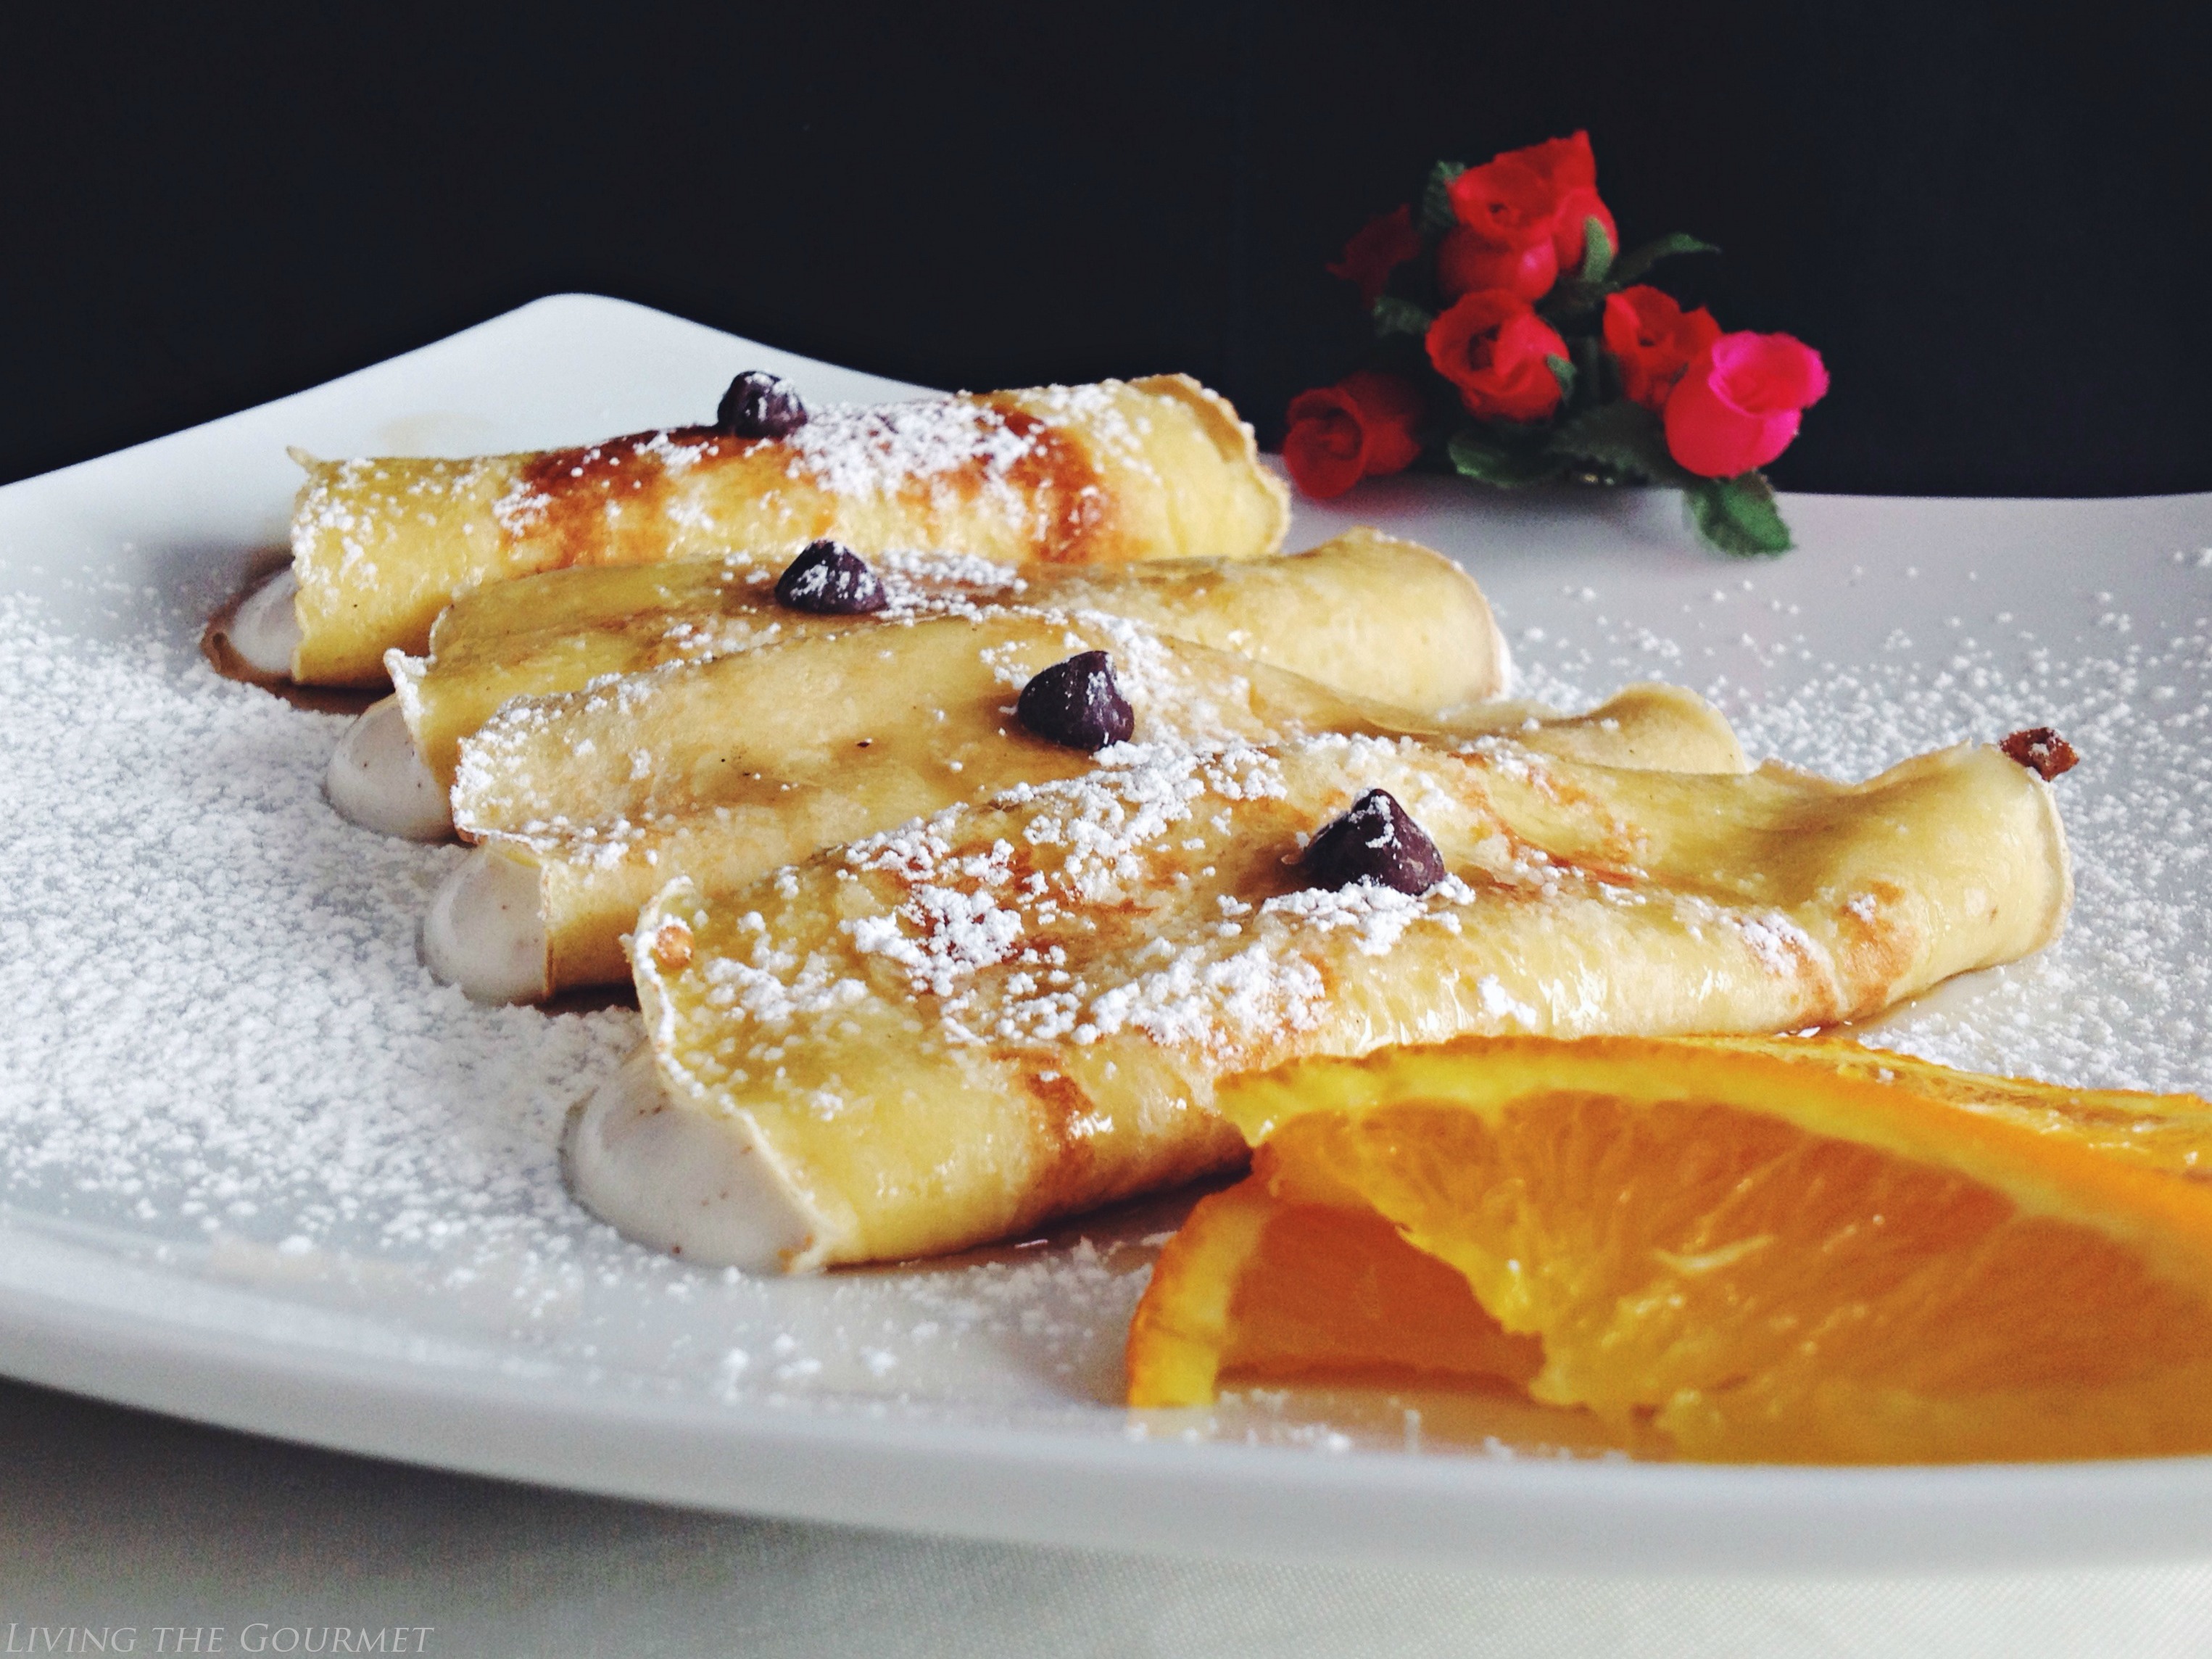 Living the Gourmet:  Cannoli Crepes